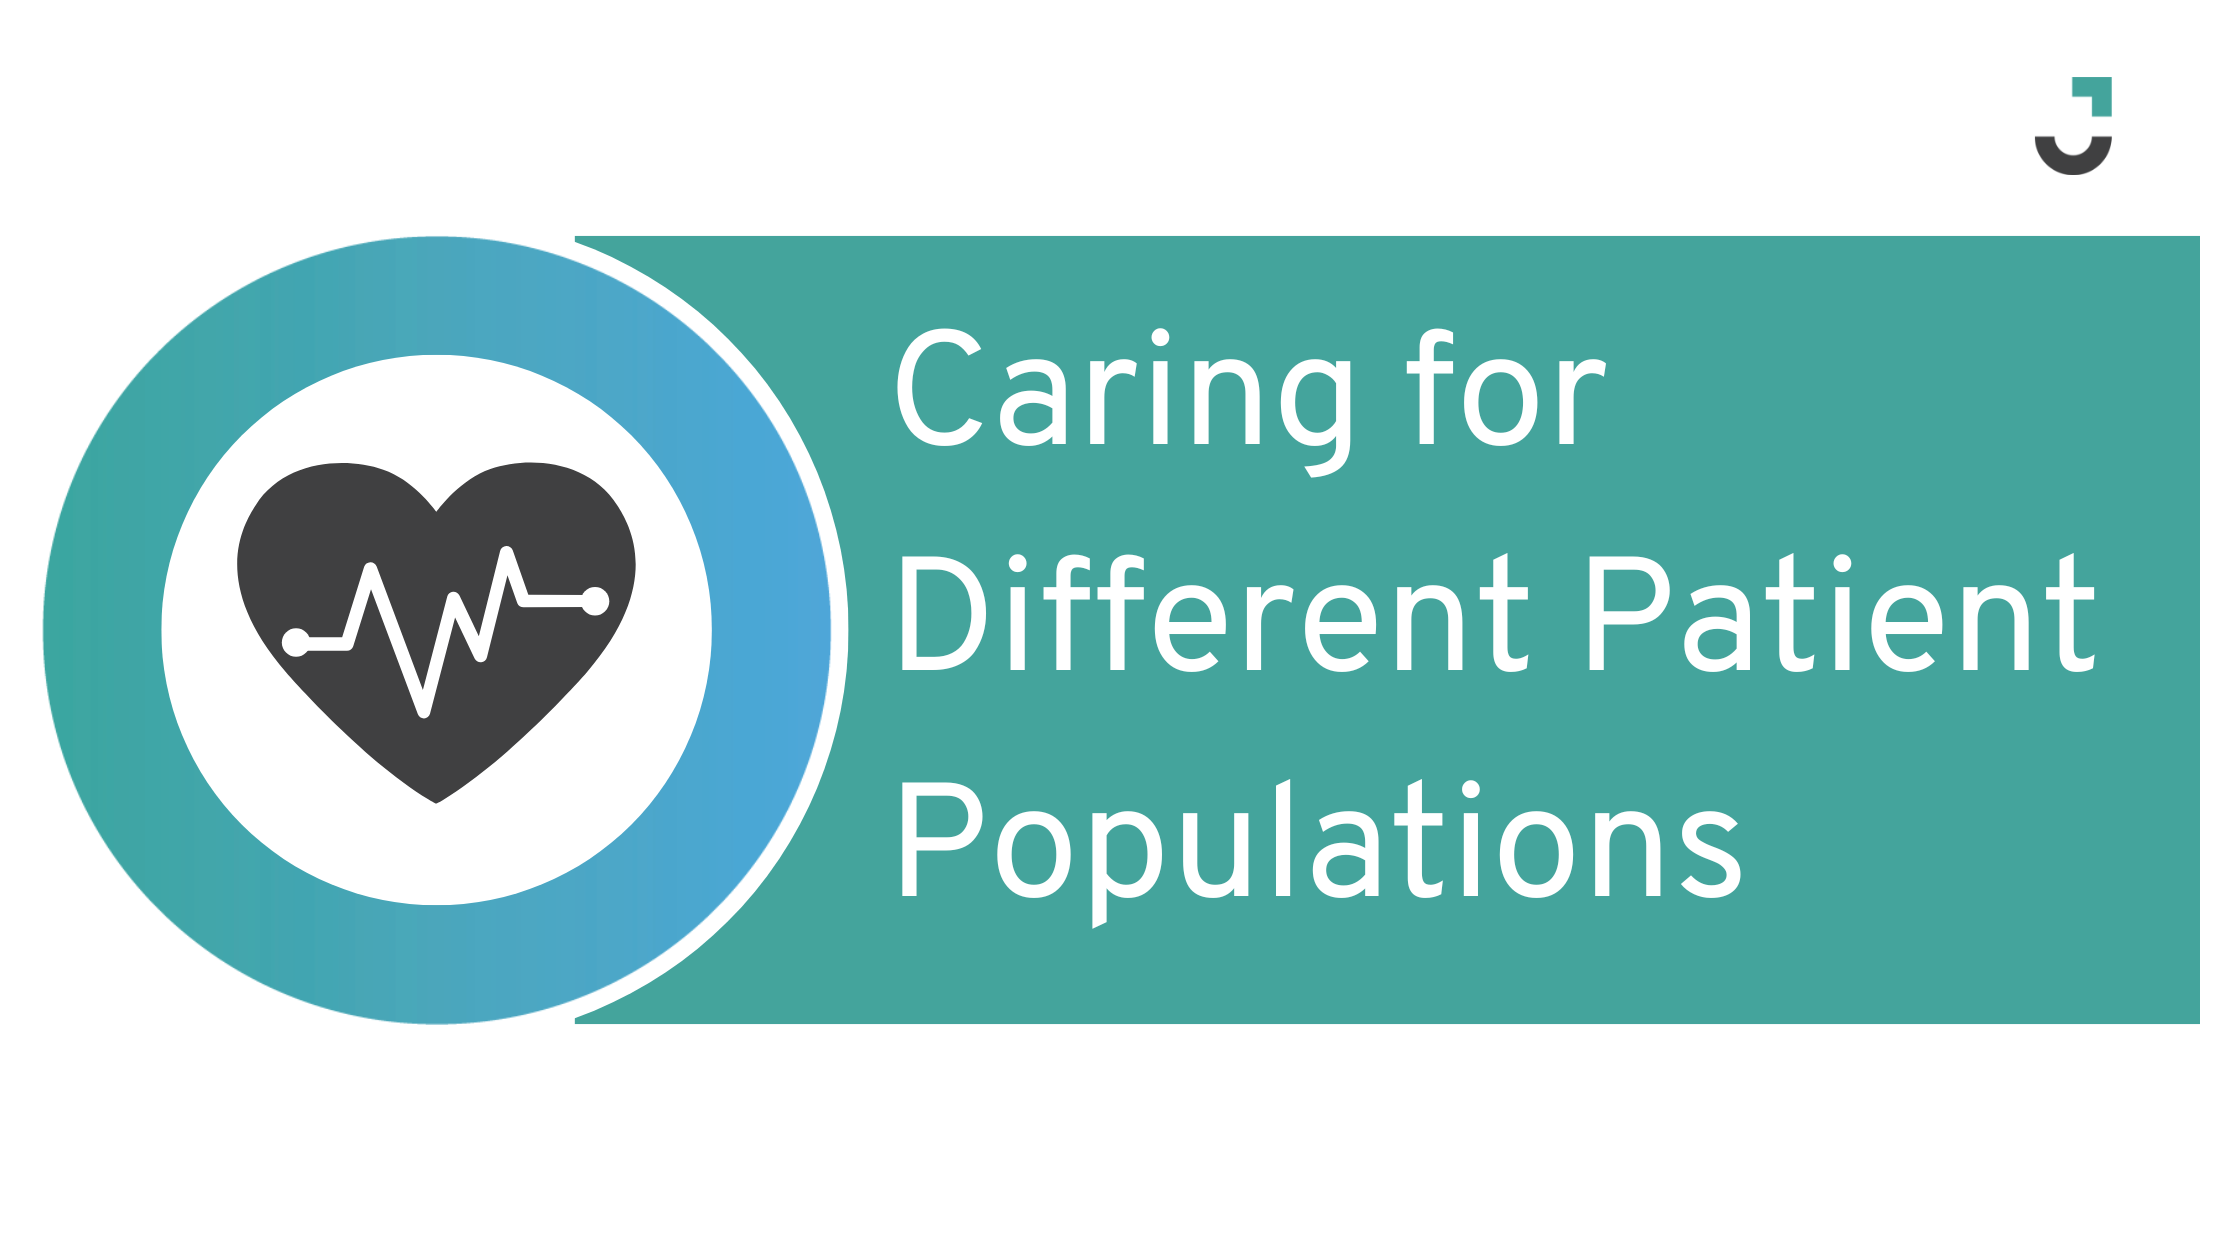 Caring for Different Patient Populations